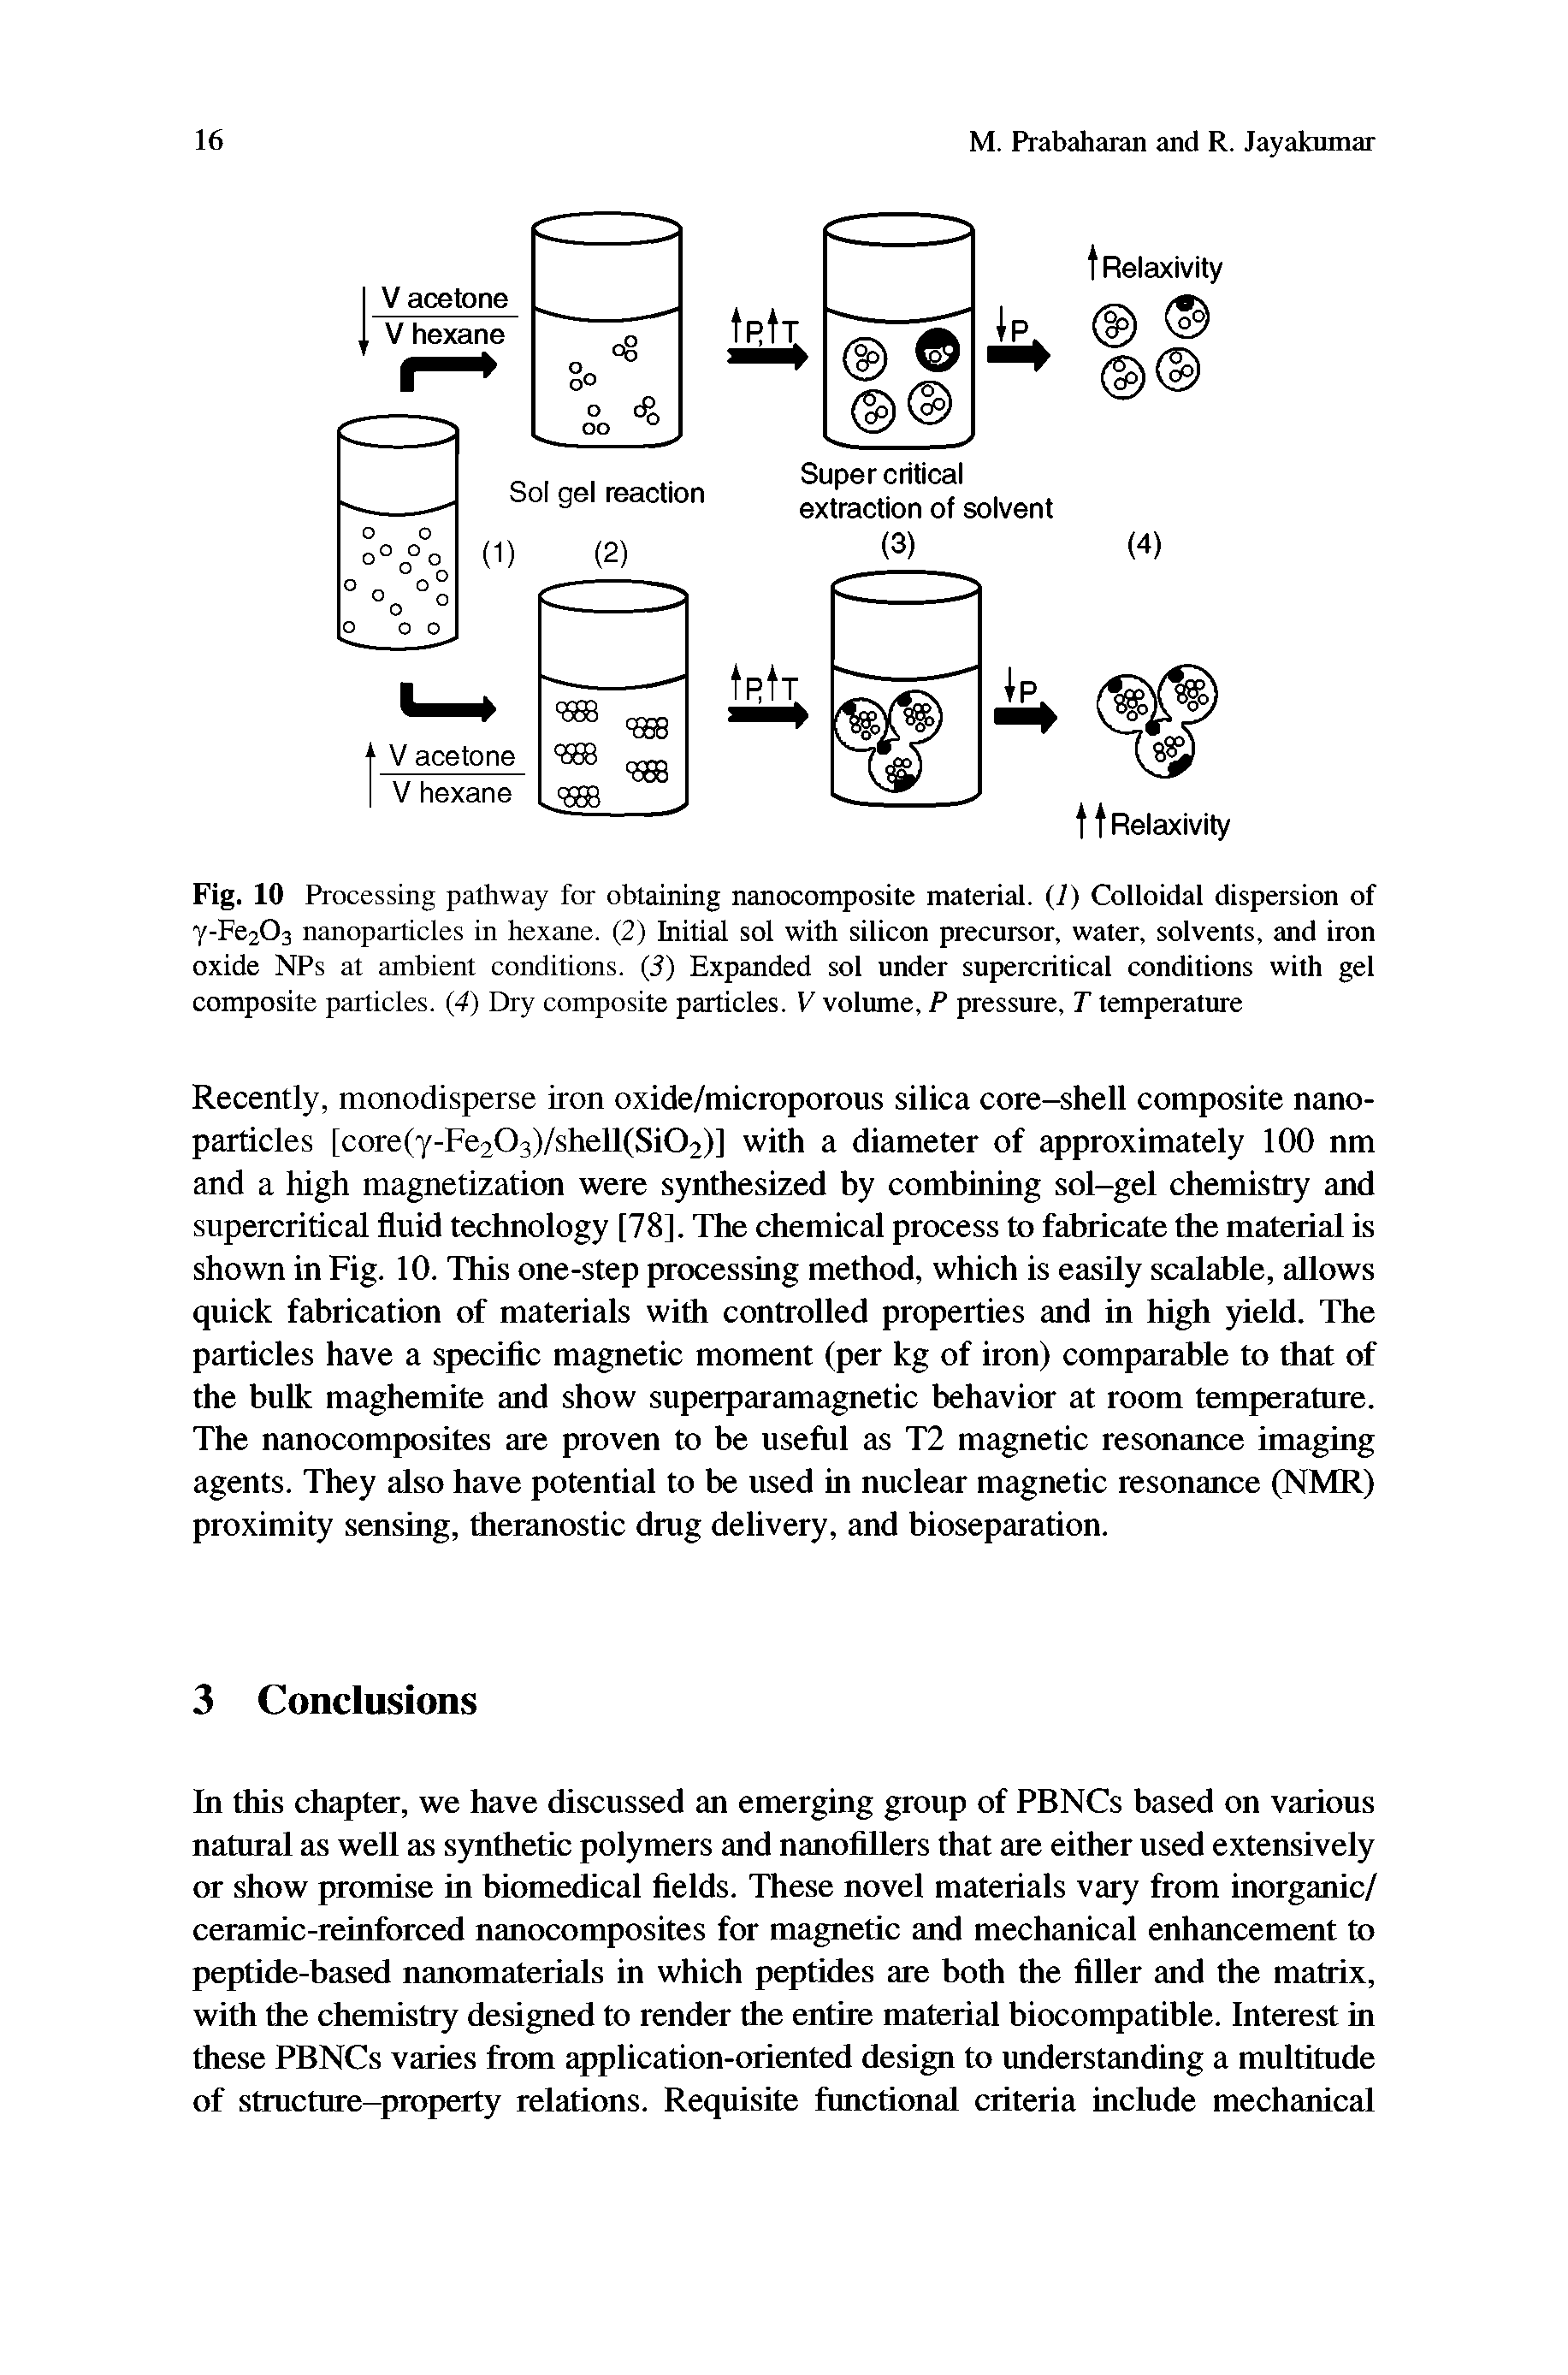 Fig. 10 Processing pathway for obtaining nanocomposite material. (1) Colloidal dispersion of y-Fe203 nanoparticles in hexane. (2) Initial sol with silicon precursor, water, solvents, and iron oxide NPs at ambient conditions, (i) Expanded sol under supercritical conditions with gel composite particles. (4) Dry composite particles. V volume, P pressure, T temperature...